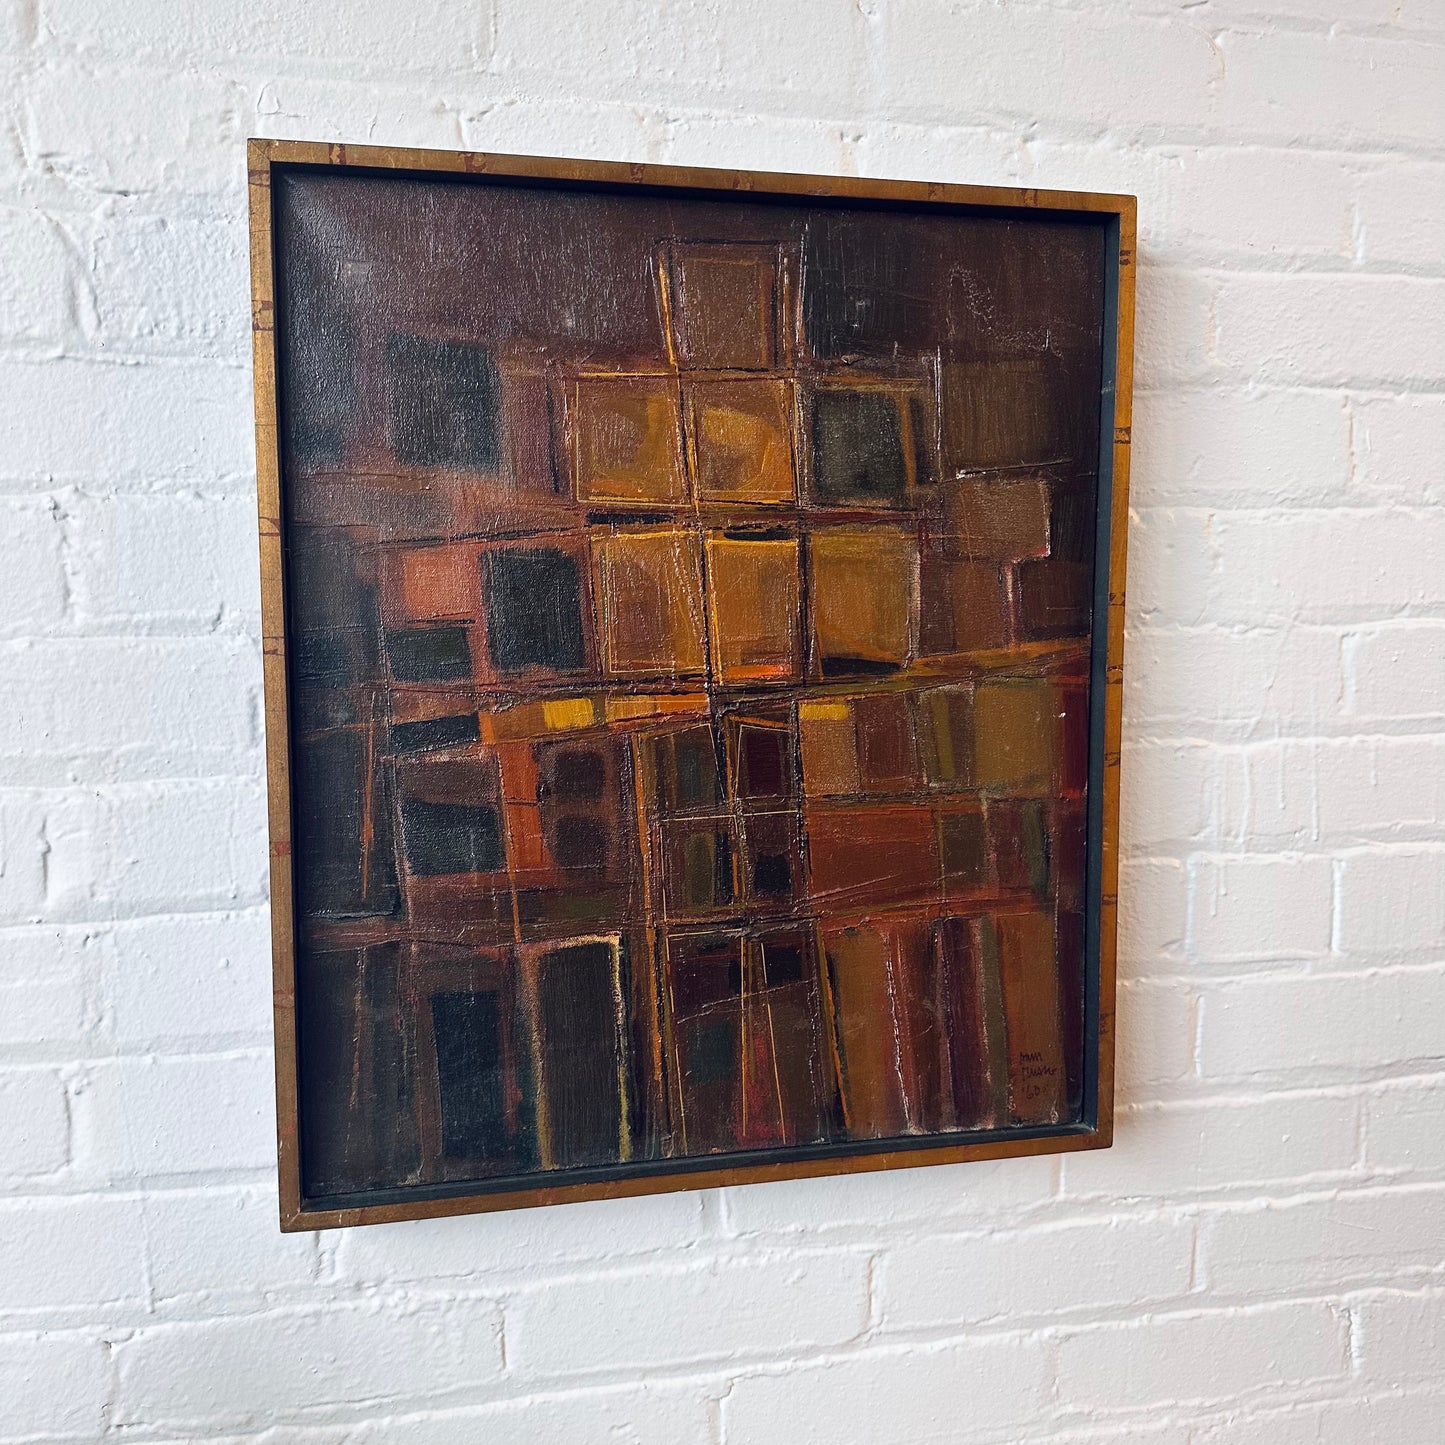 SAM RUSSO (B. 1922) SIGNED ABSTRACT OIL ON CANVAS “STRUCTURE” C.1960